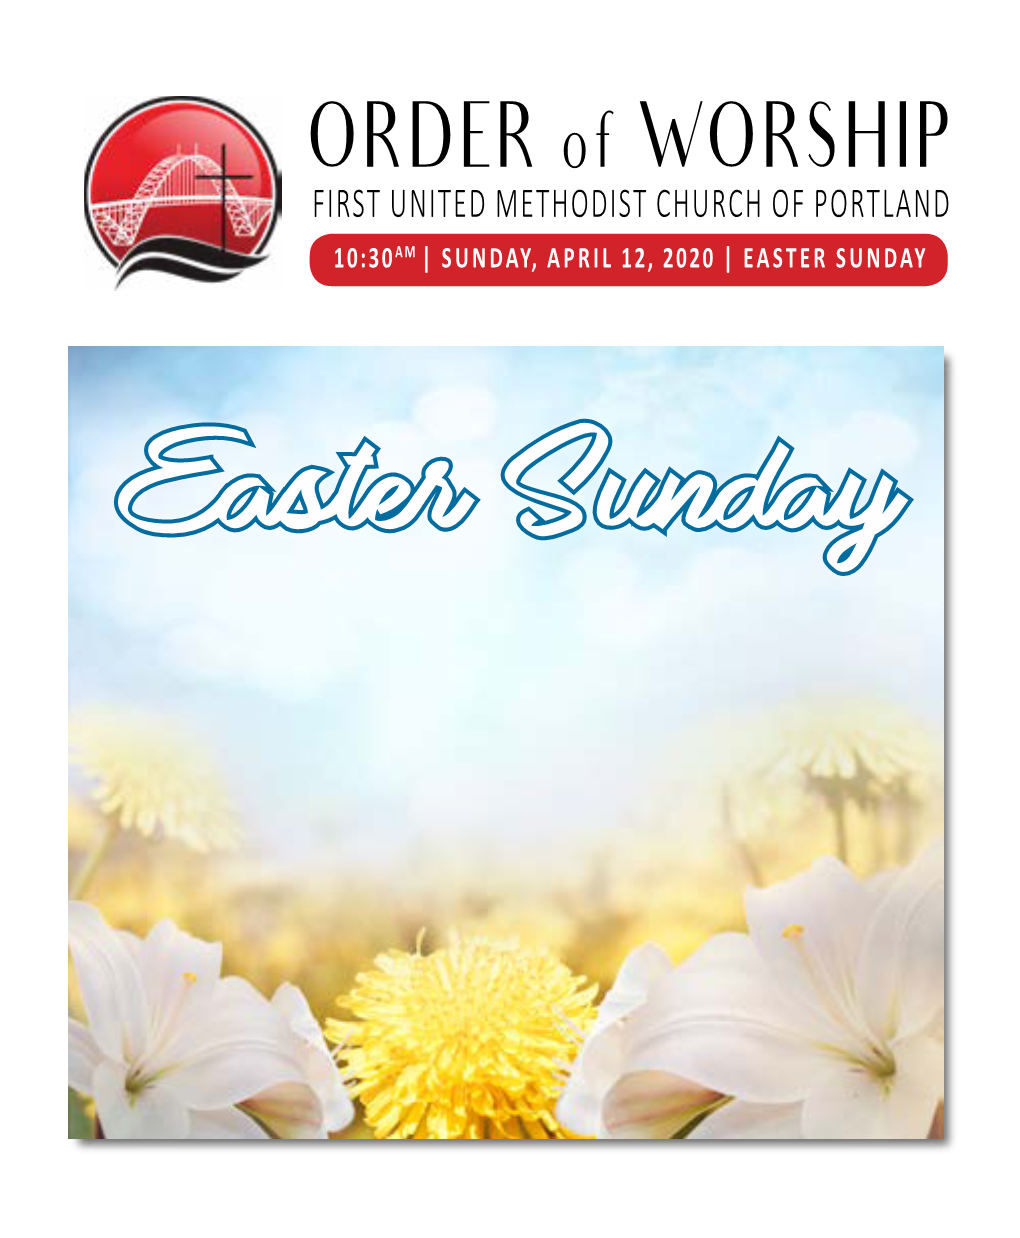 ORDER of WORSHIP FIRST UNITED METHODIST CHURCH of PORTLAND 10:30AM | SUNDAY, APRIL 12, 2020 | EASTER SUNDAY